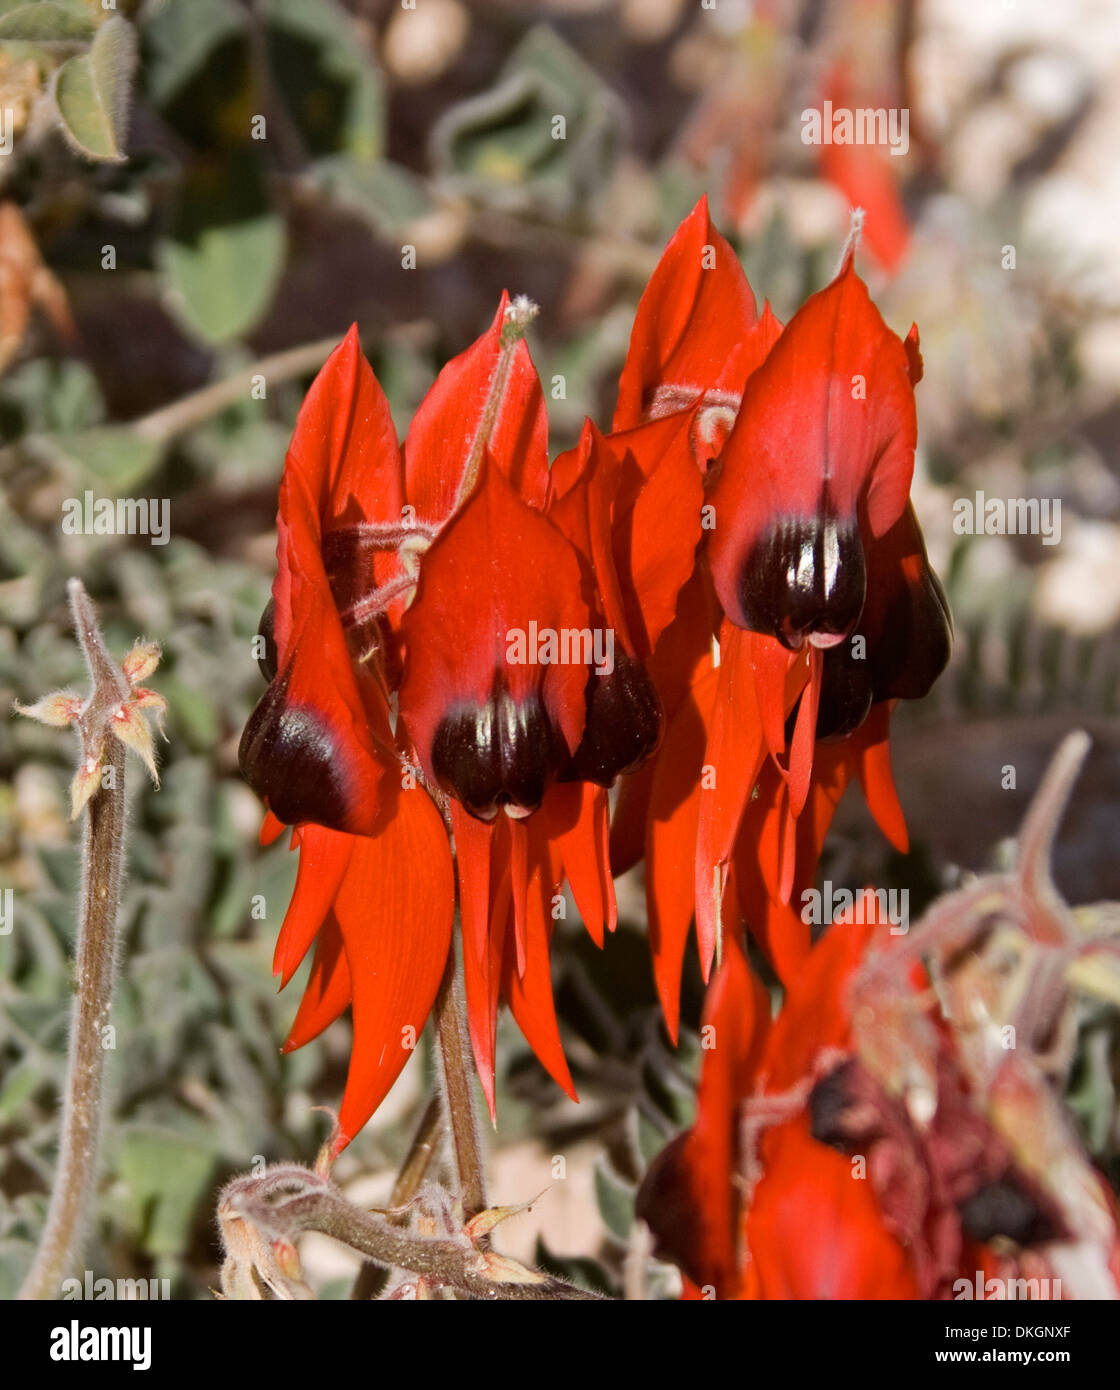 Cluster of vivid red flowers of Sturt's desert pea, Swainsona formosa, wildflowers growing in outback Australia Stock Photo